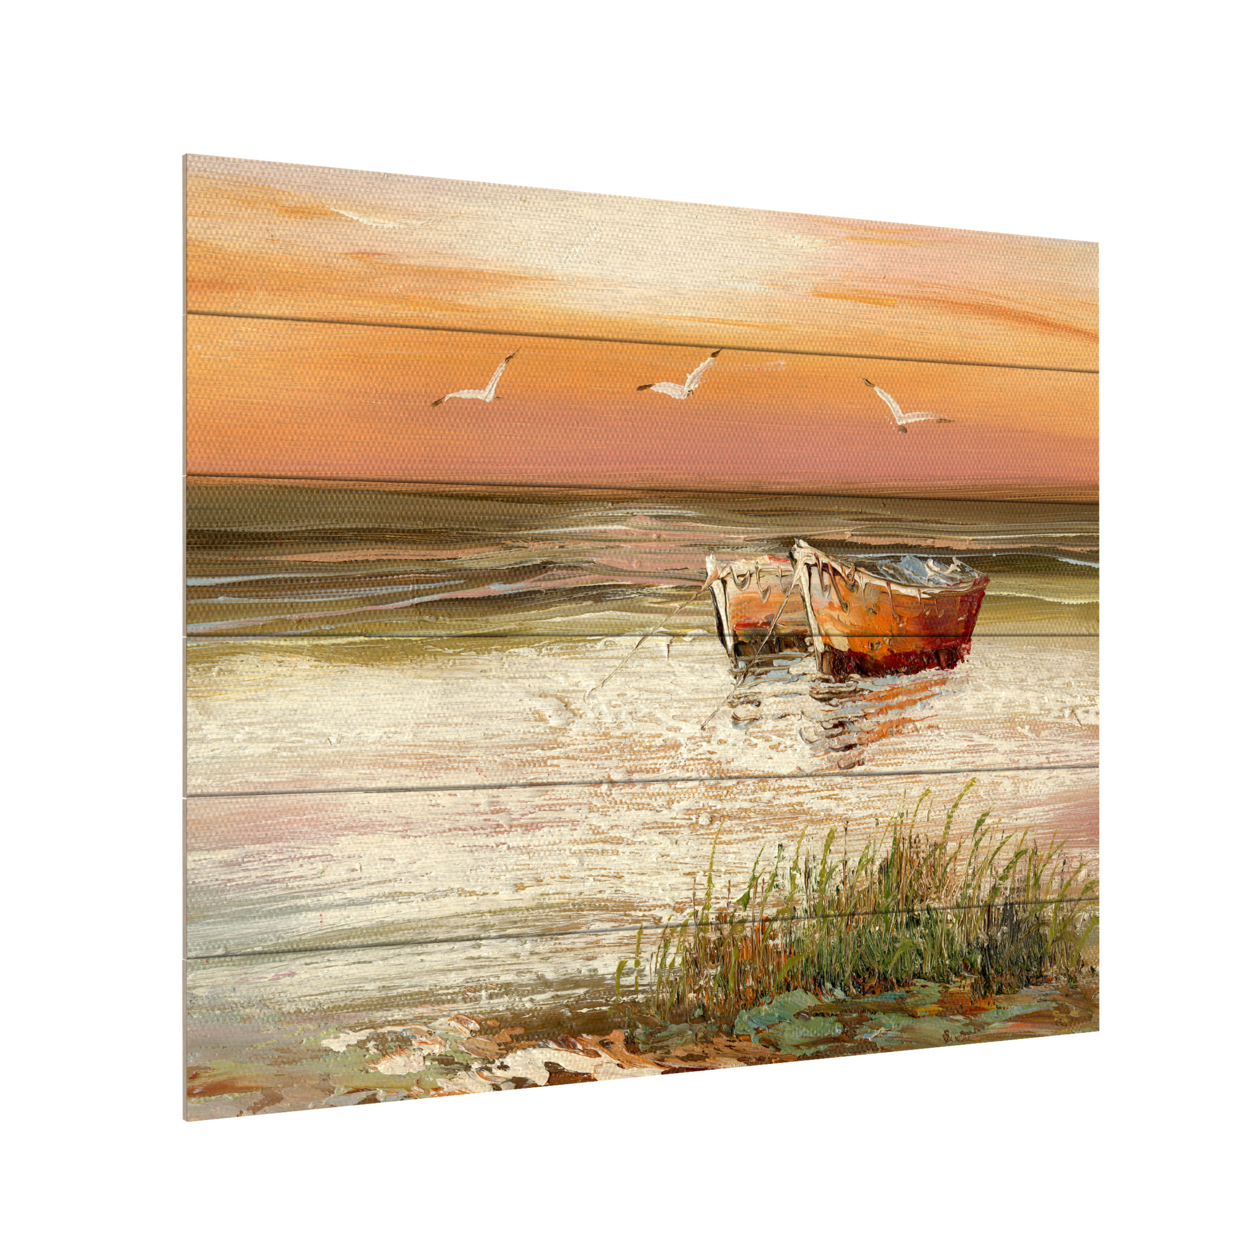 Wooden Slat Art 18 X 22 Inches Titled Florida Sunset Ready To Hang Home Decor Picture